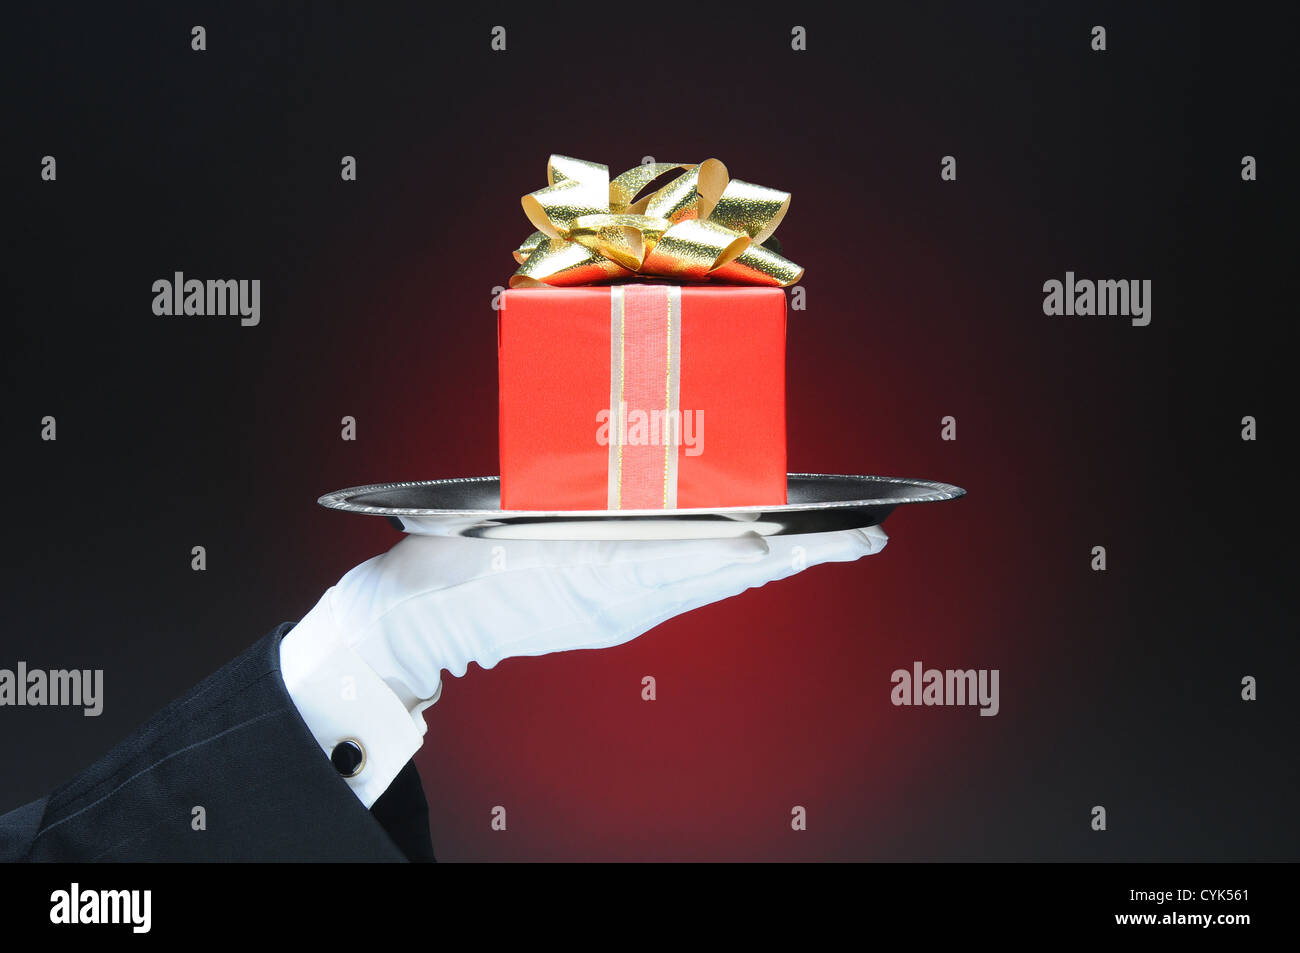 A butler wearing a tuxedo and white glove holding a tray with a wrapped present. Stock Photo